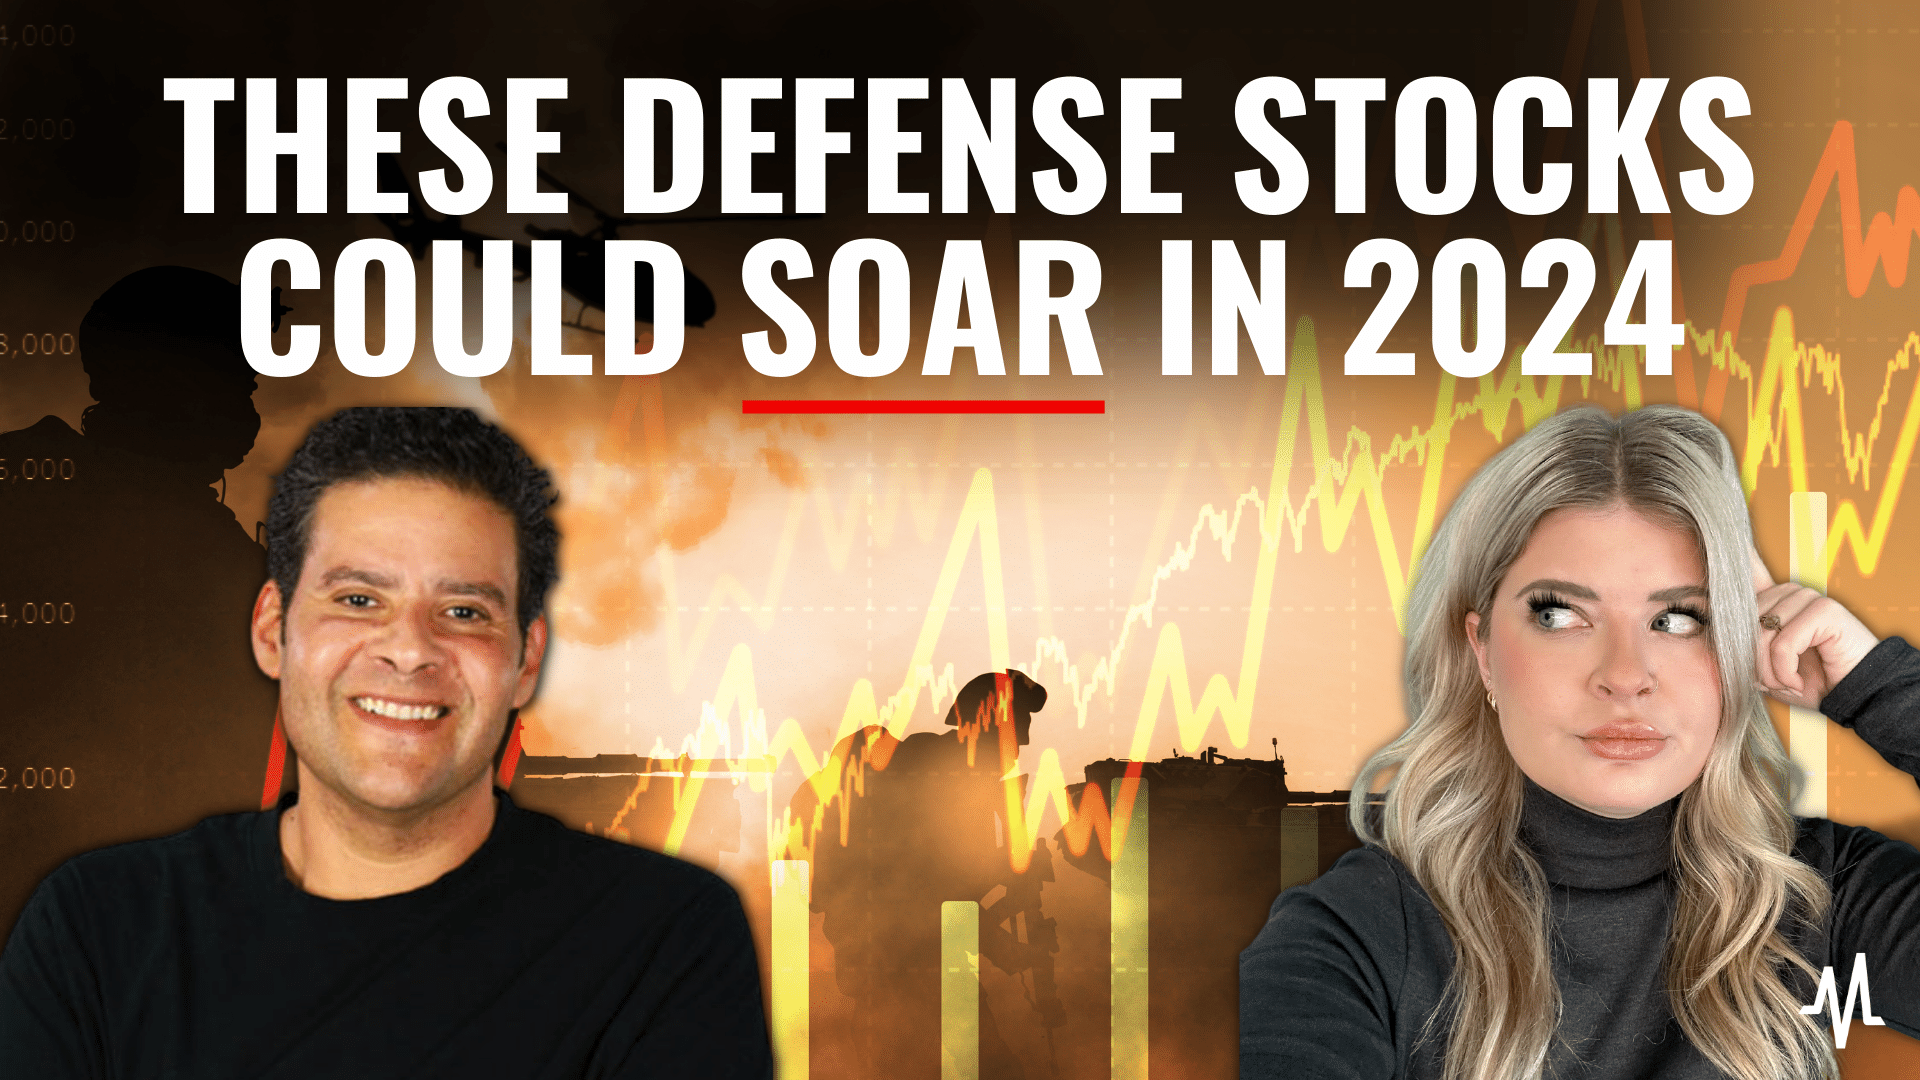 Why These Defense Stocks Could Soar in 2024